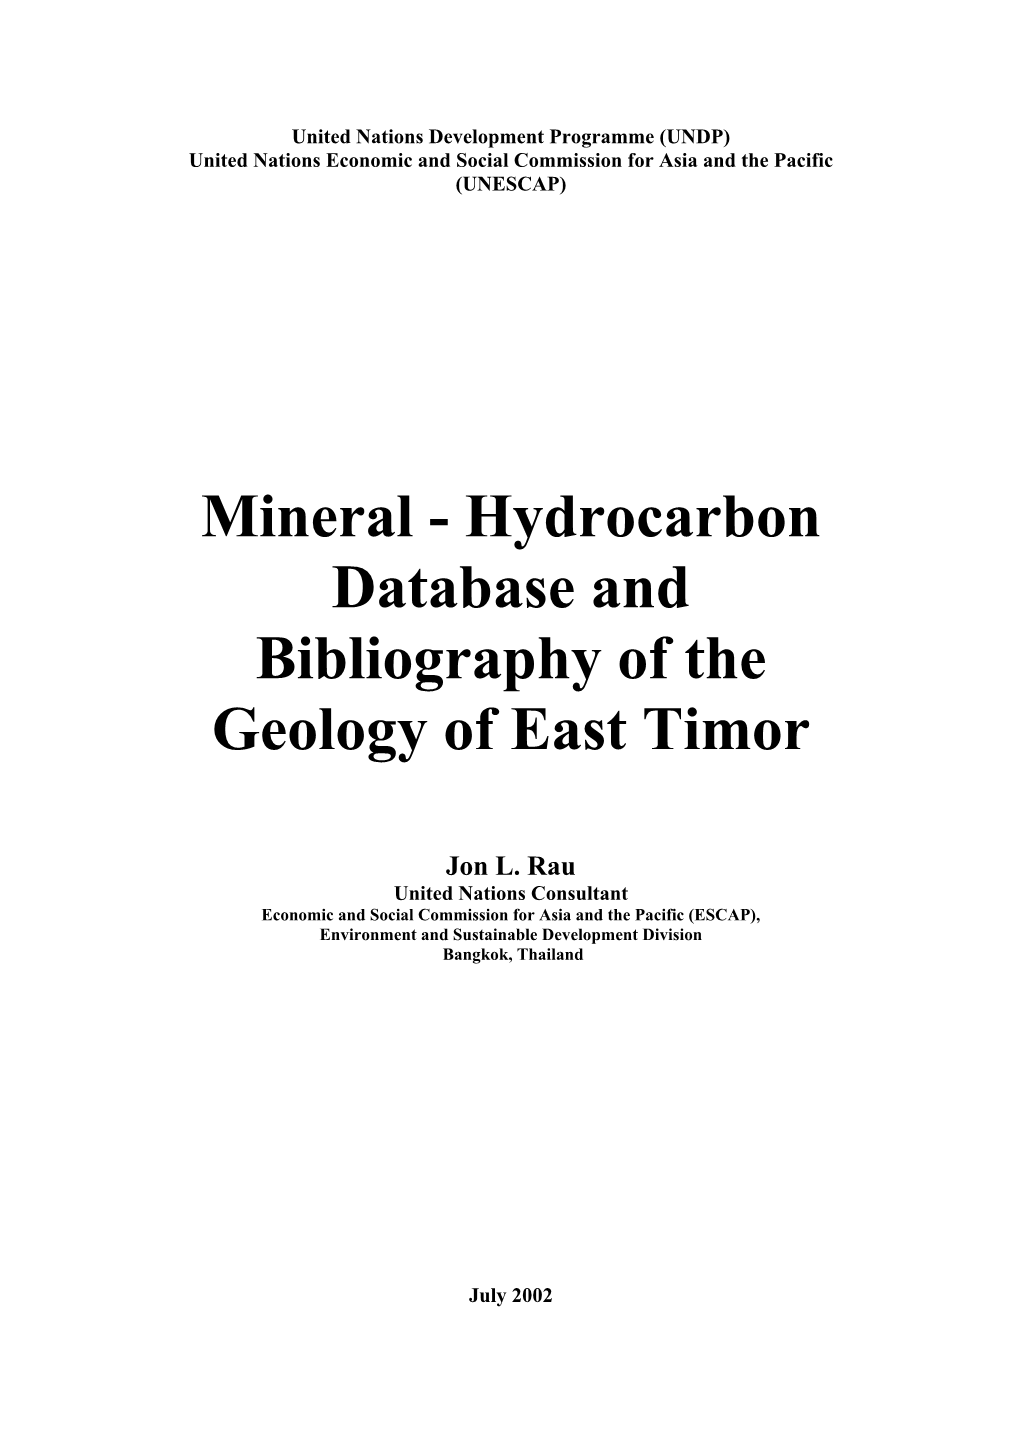 Mineral - Hydrocarbon Database and Bibliography of the Geology of East Timor